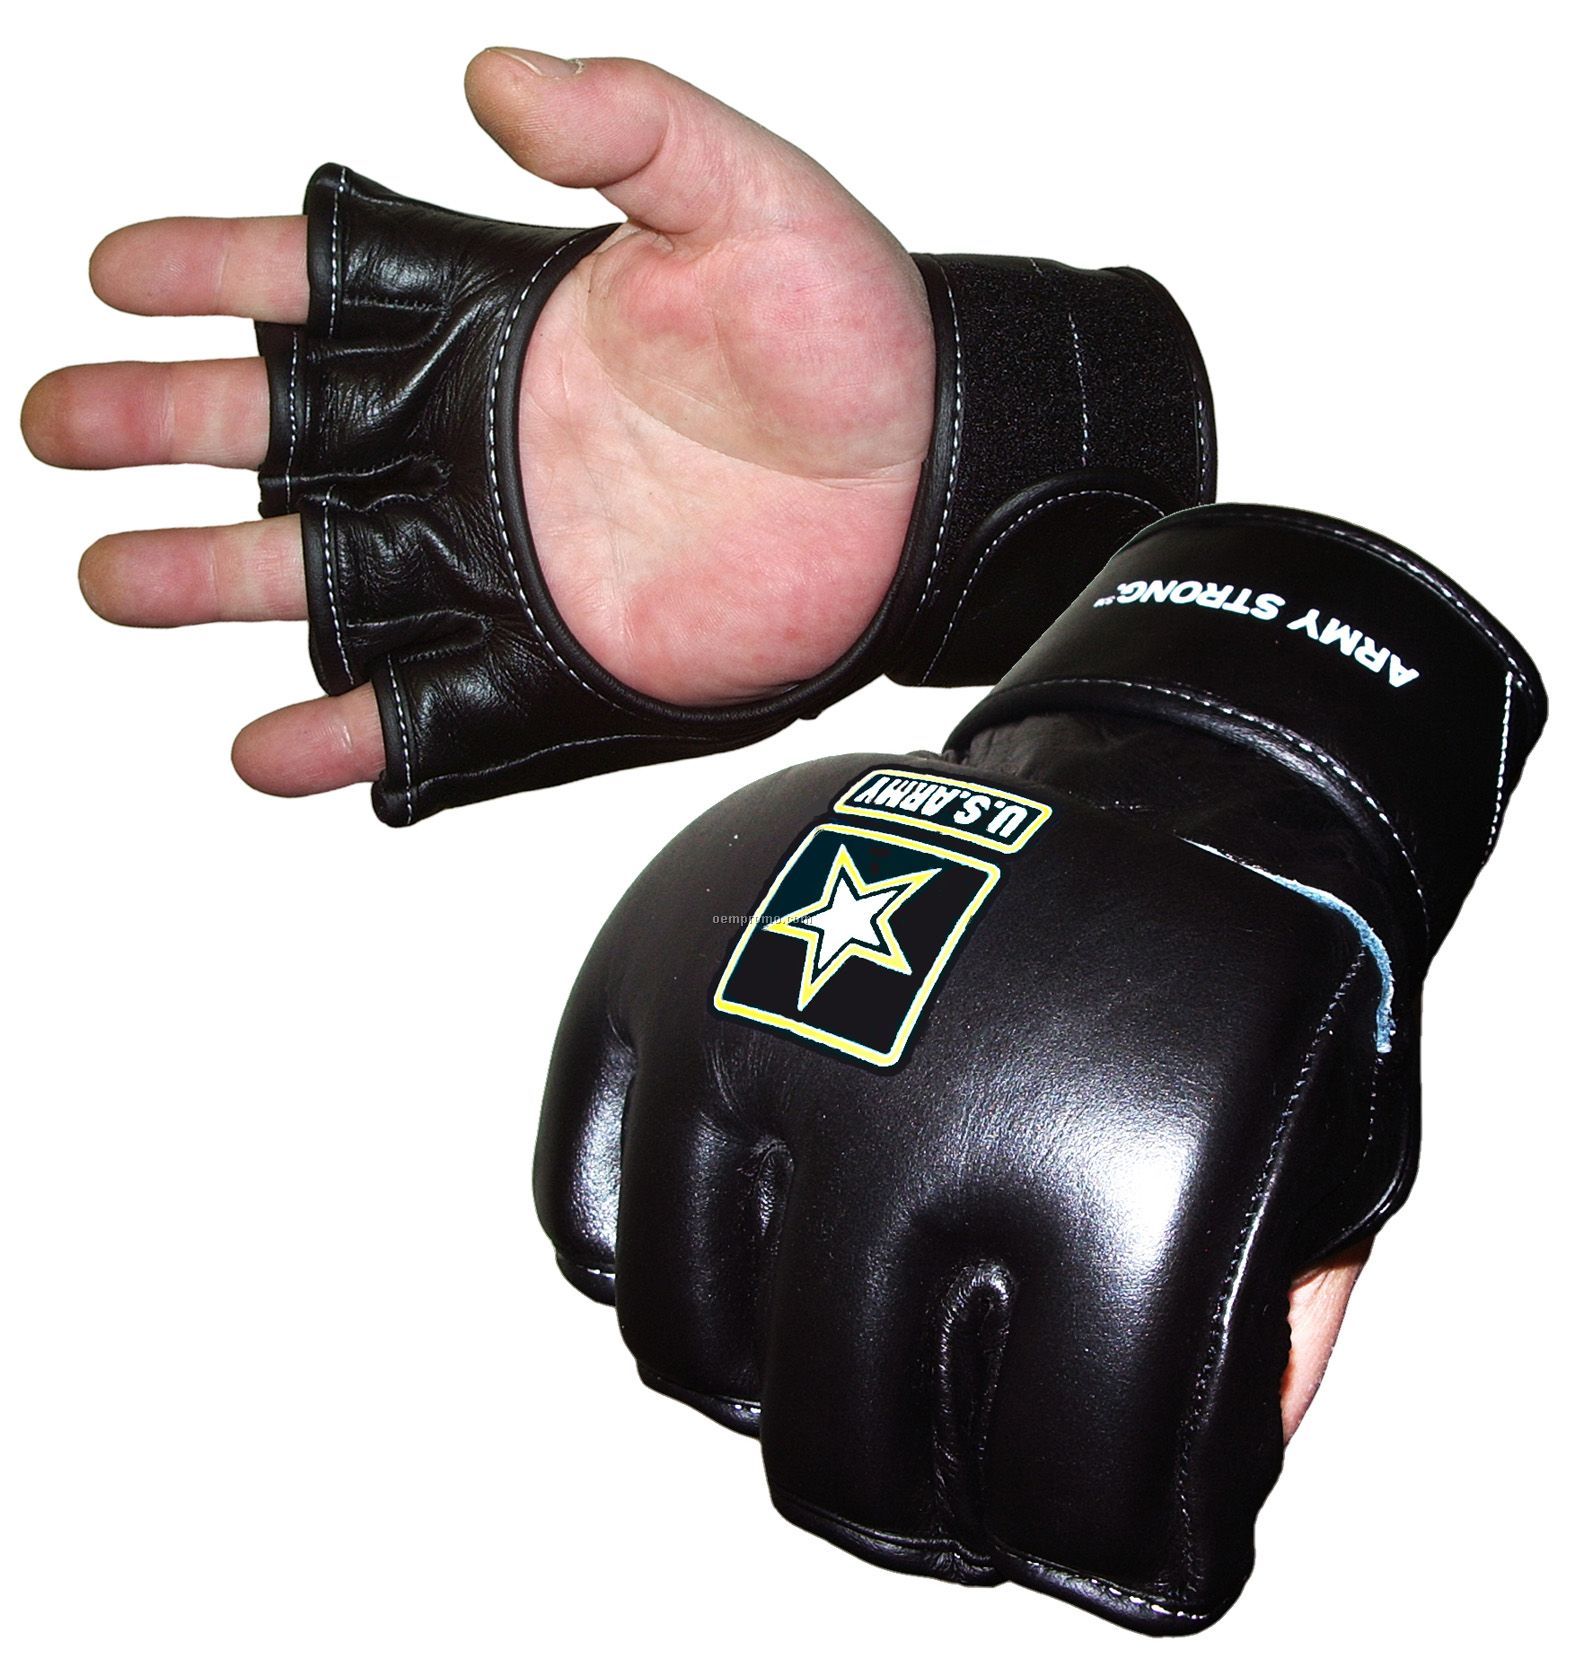 Mma Boxing Gloves, Artificial Leather